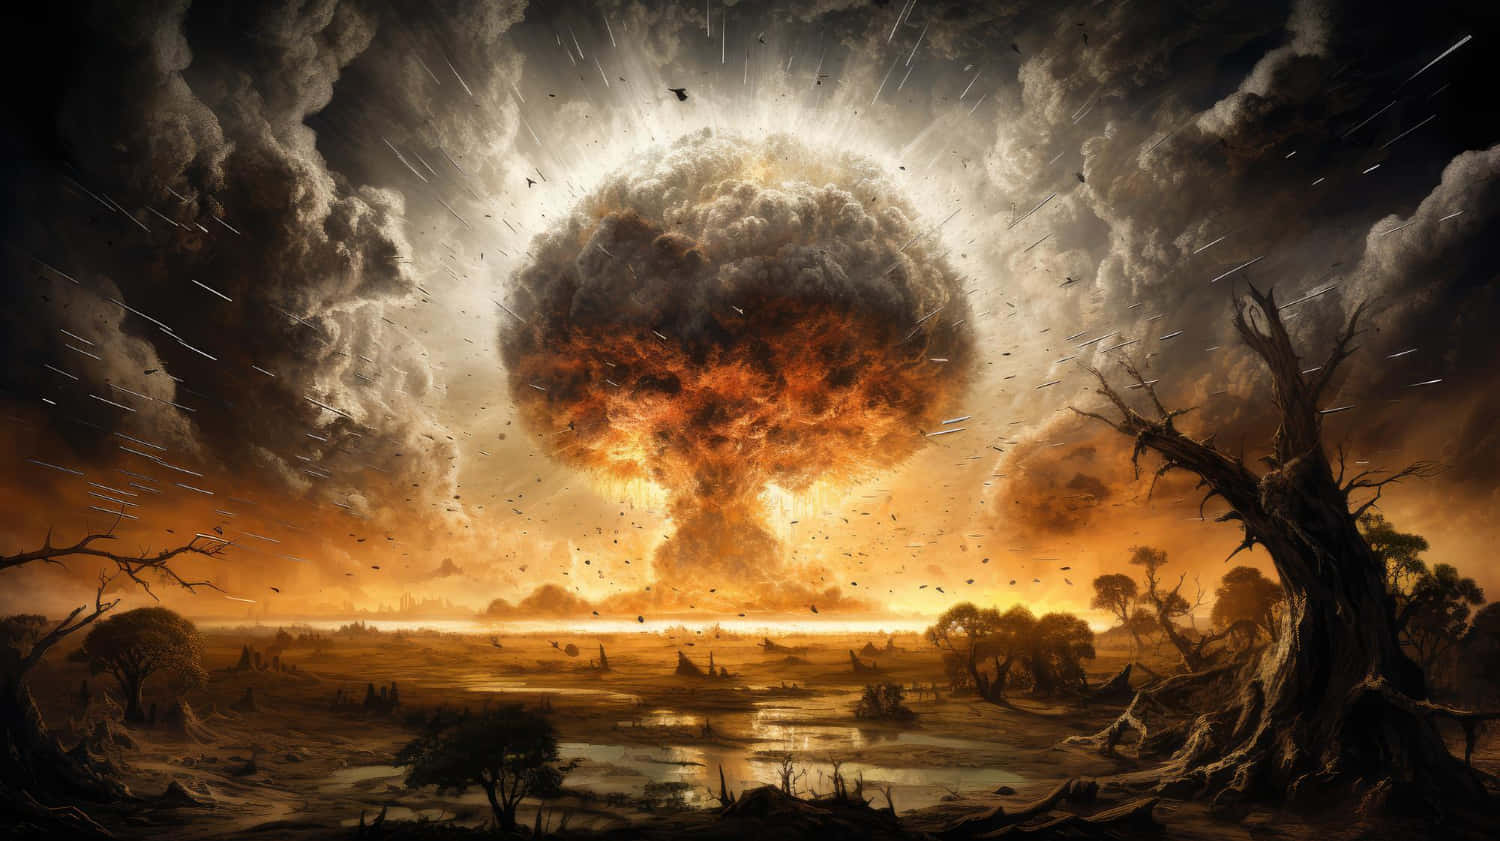 Apocalyptic Nuclear Explosion Artwork Wallpaper